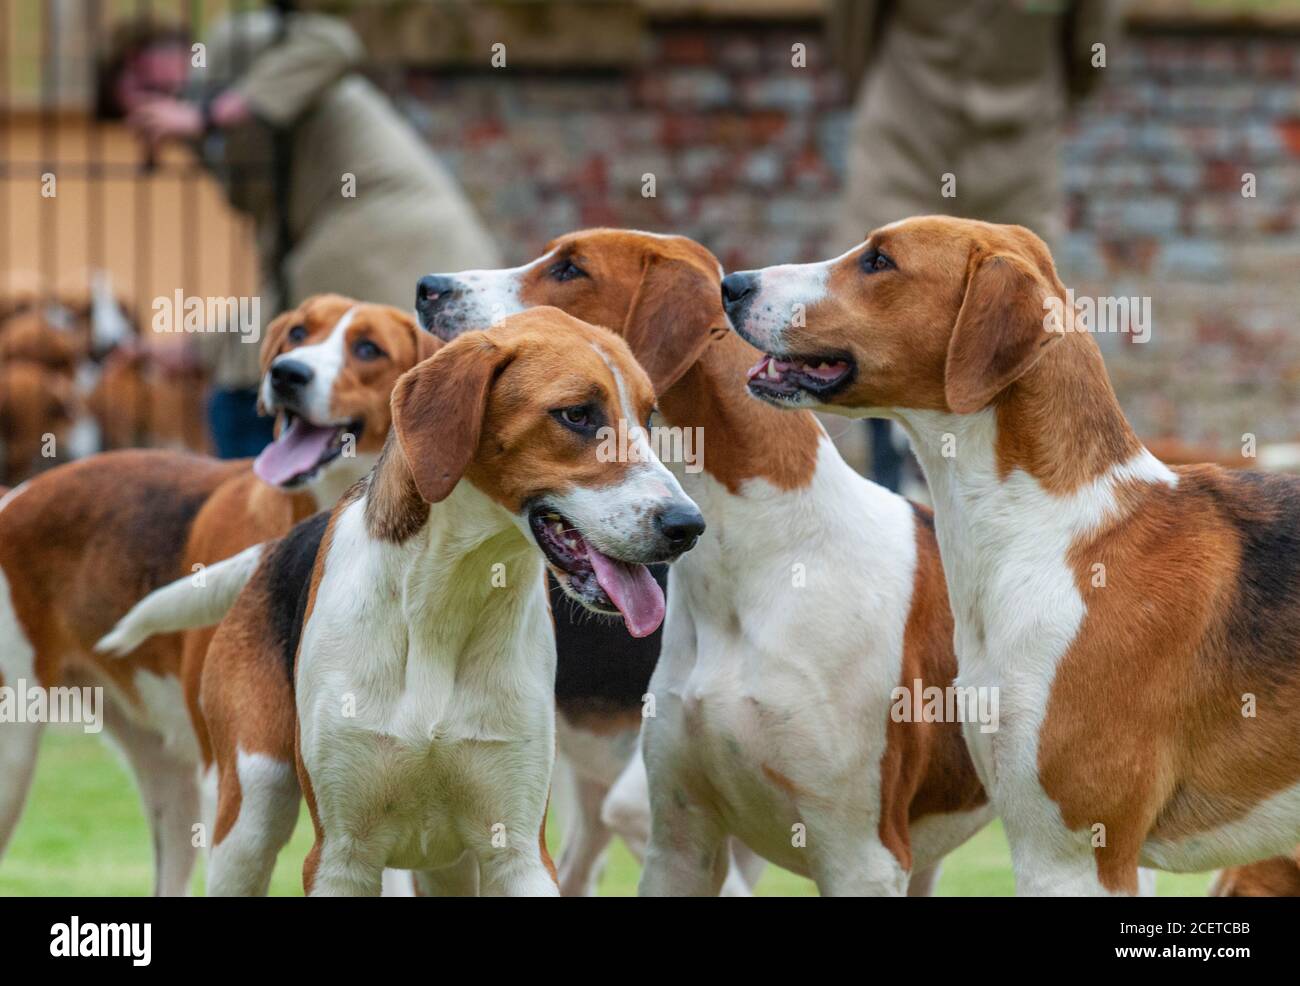 Belvoir, Lincolnshire, UK - Fox Hounds at a hound show at the Belvoir Hunt Kennels Stock Photo